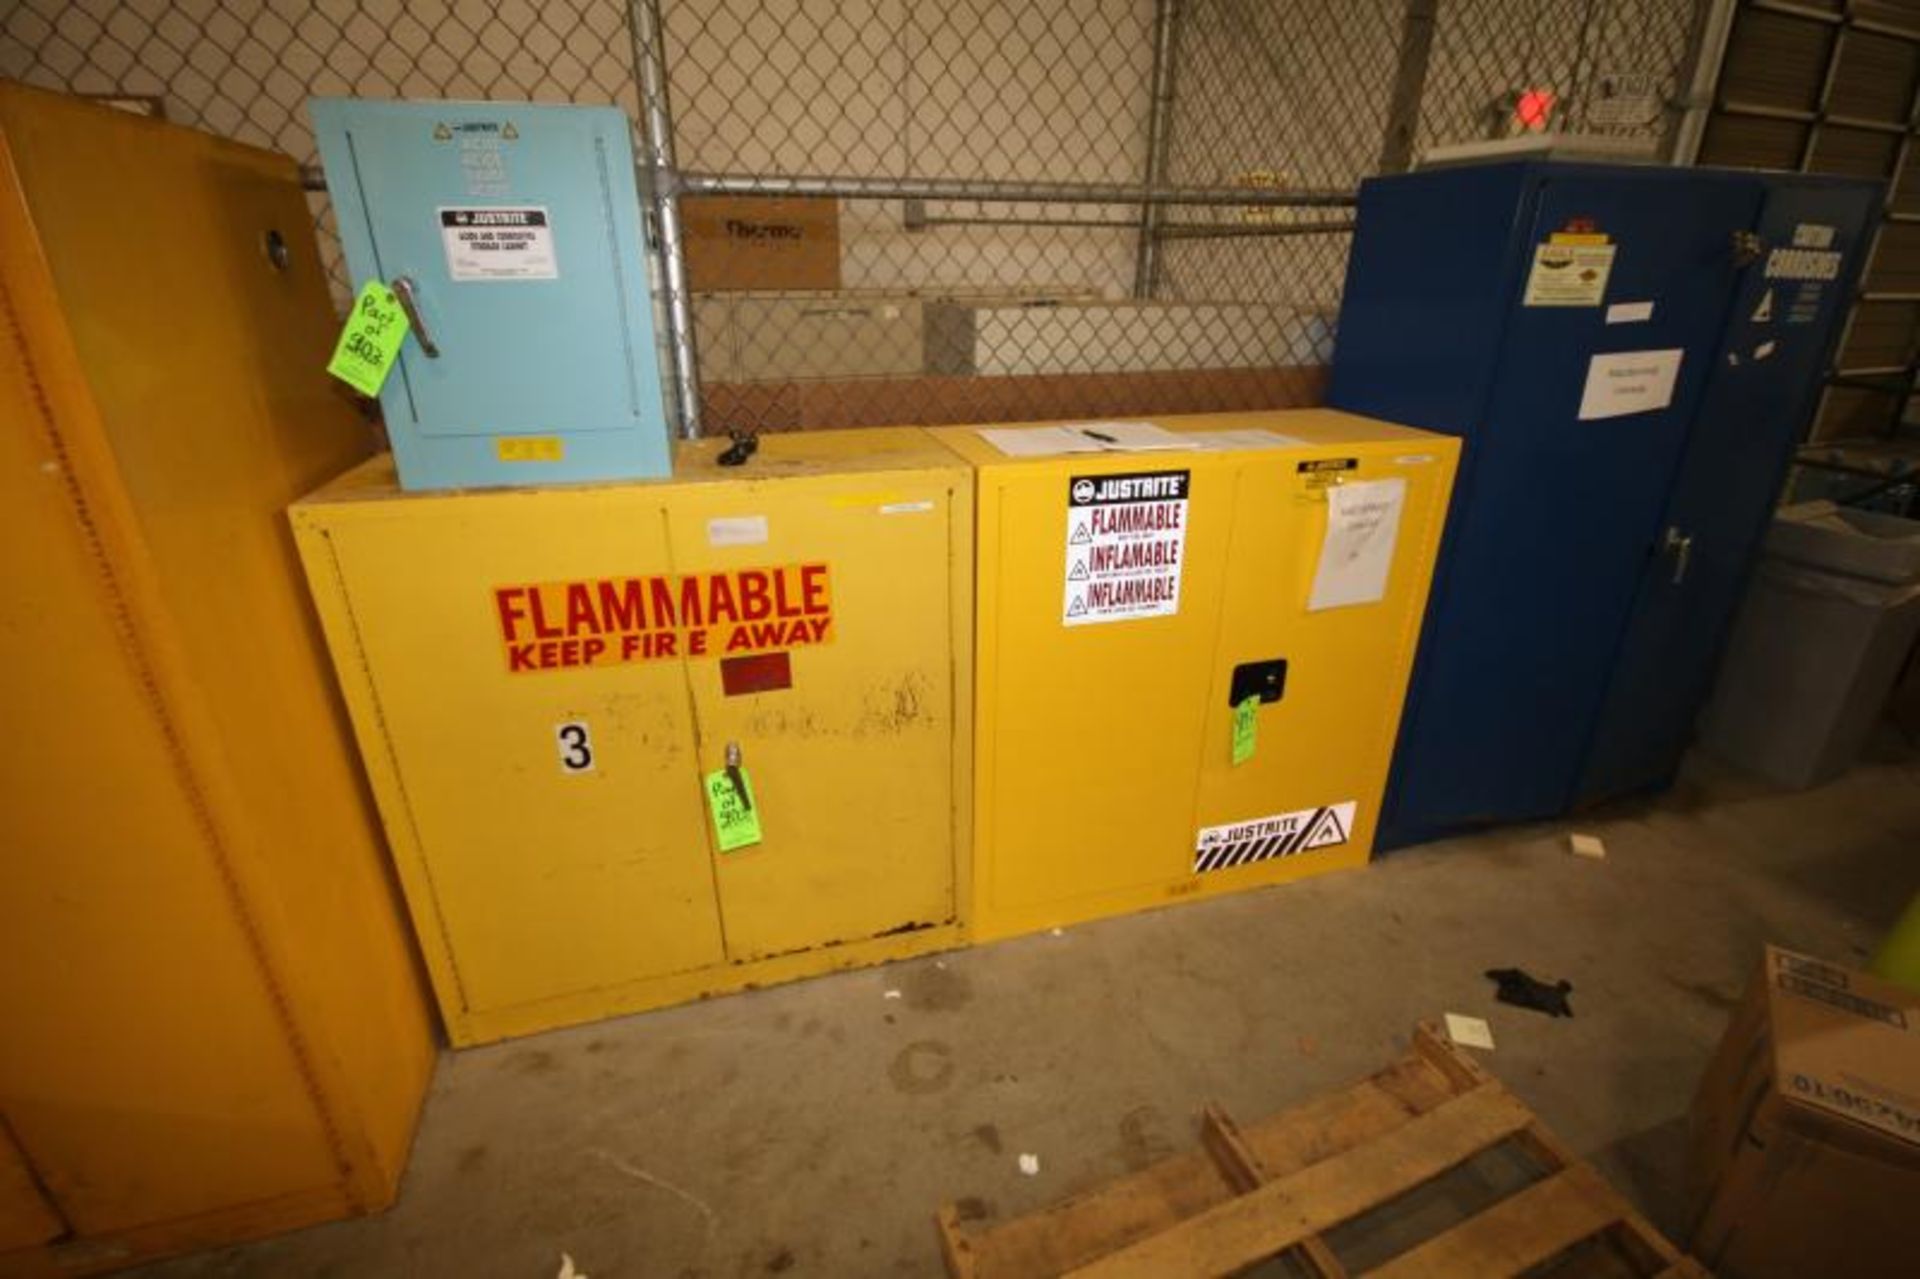 JustRite and Eagle Flammable Storage Cabinets, 30 Gal. Capacity, Overall Dims.: 43" L x 18" W x